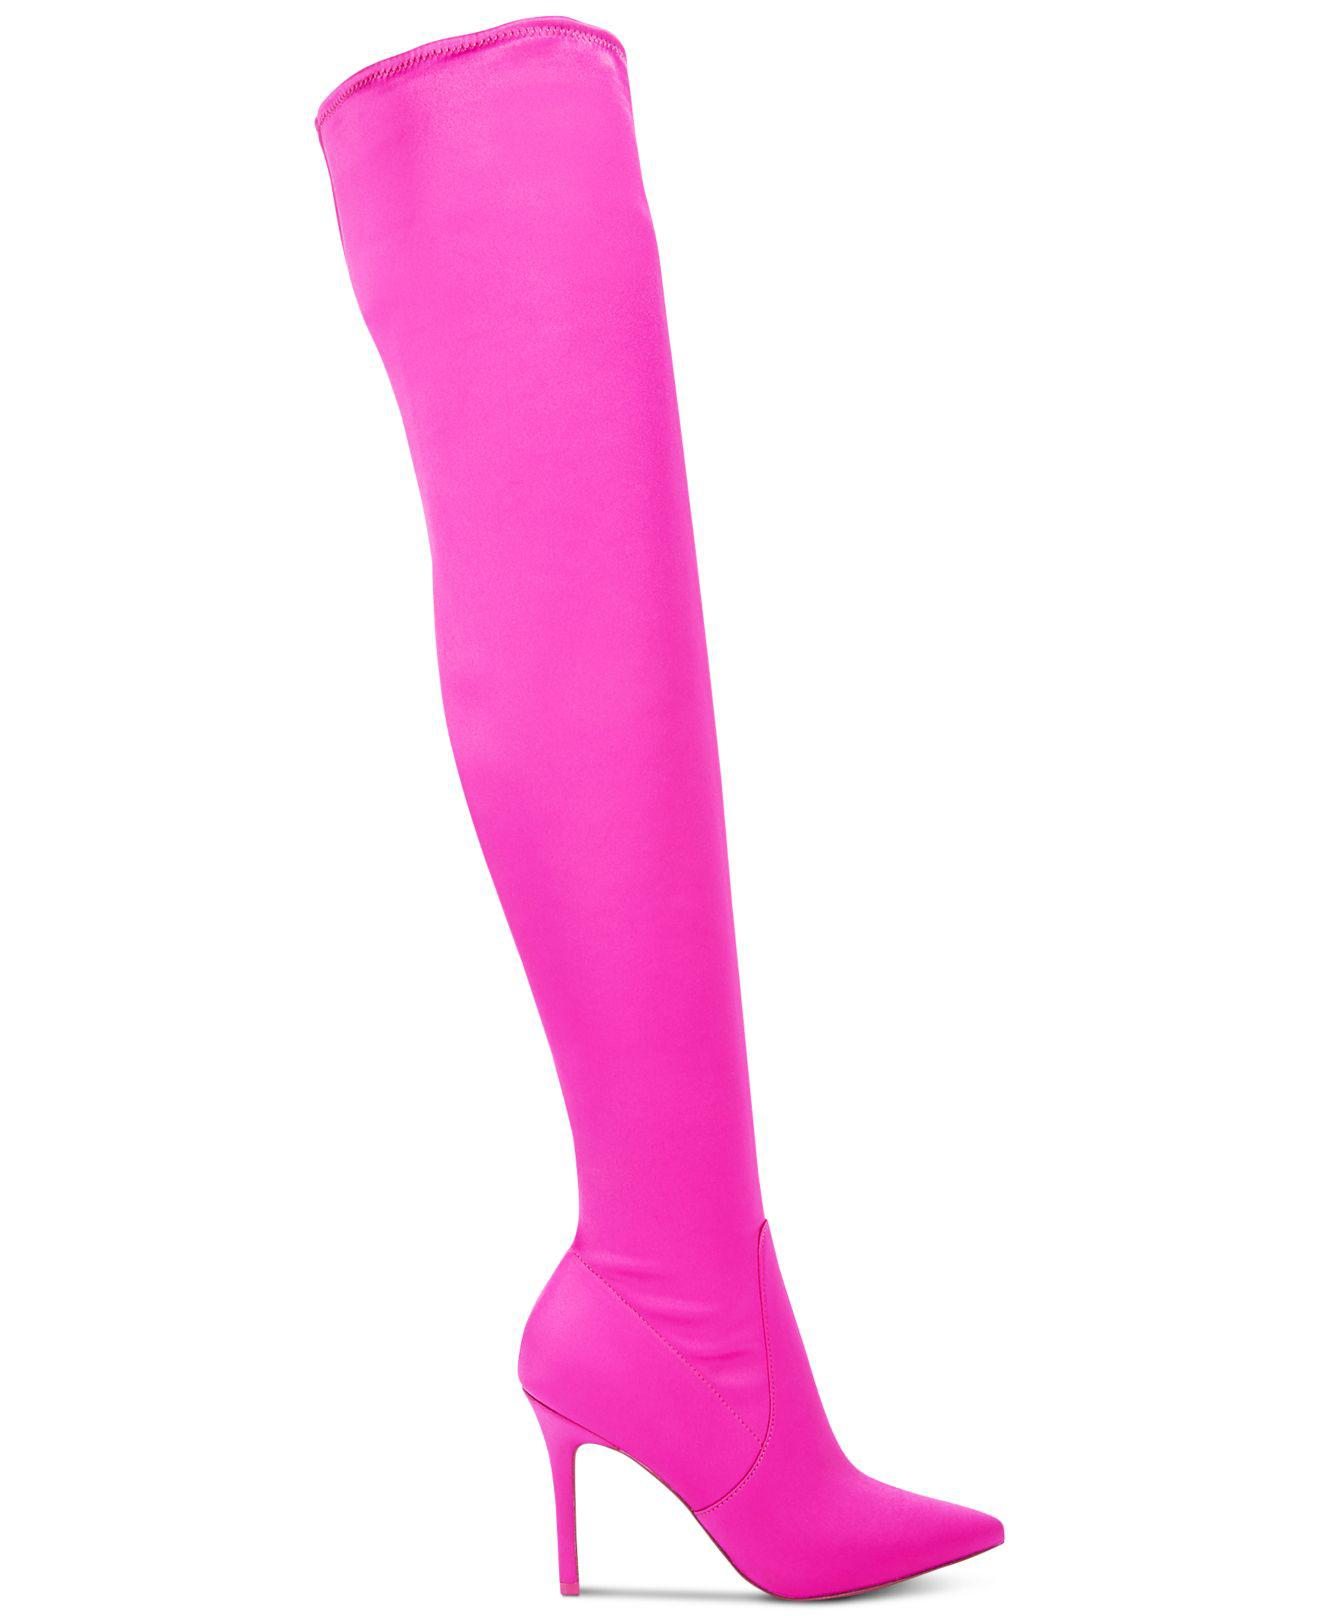 ALDO Sailors Stretch Over-the-knee Dress Boots Pink Lyst